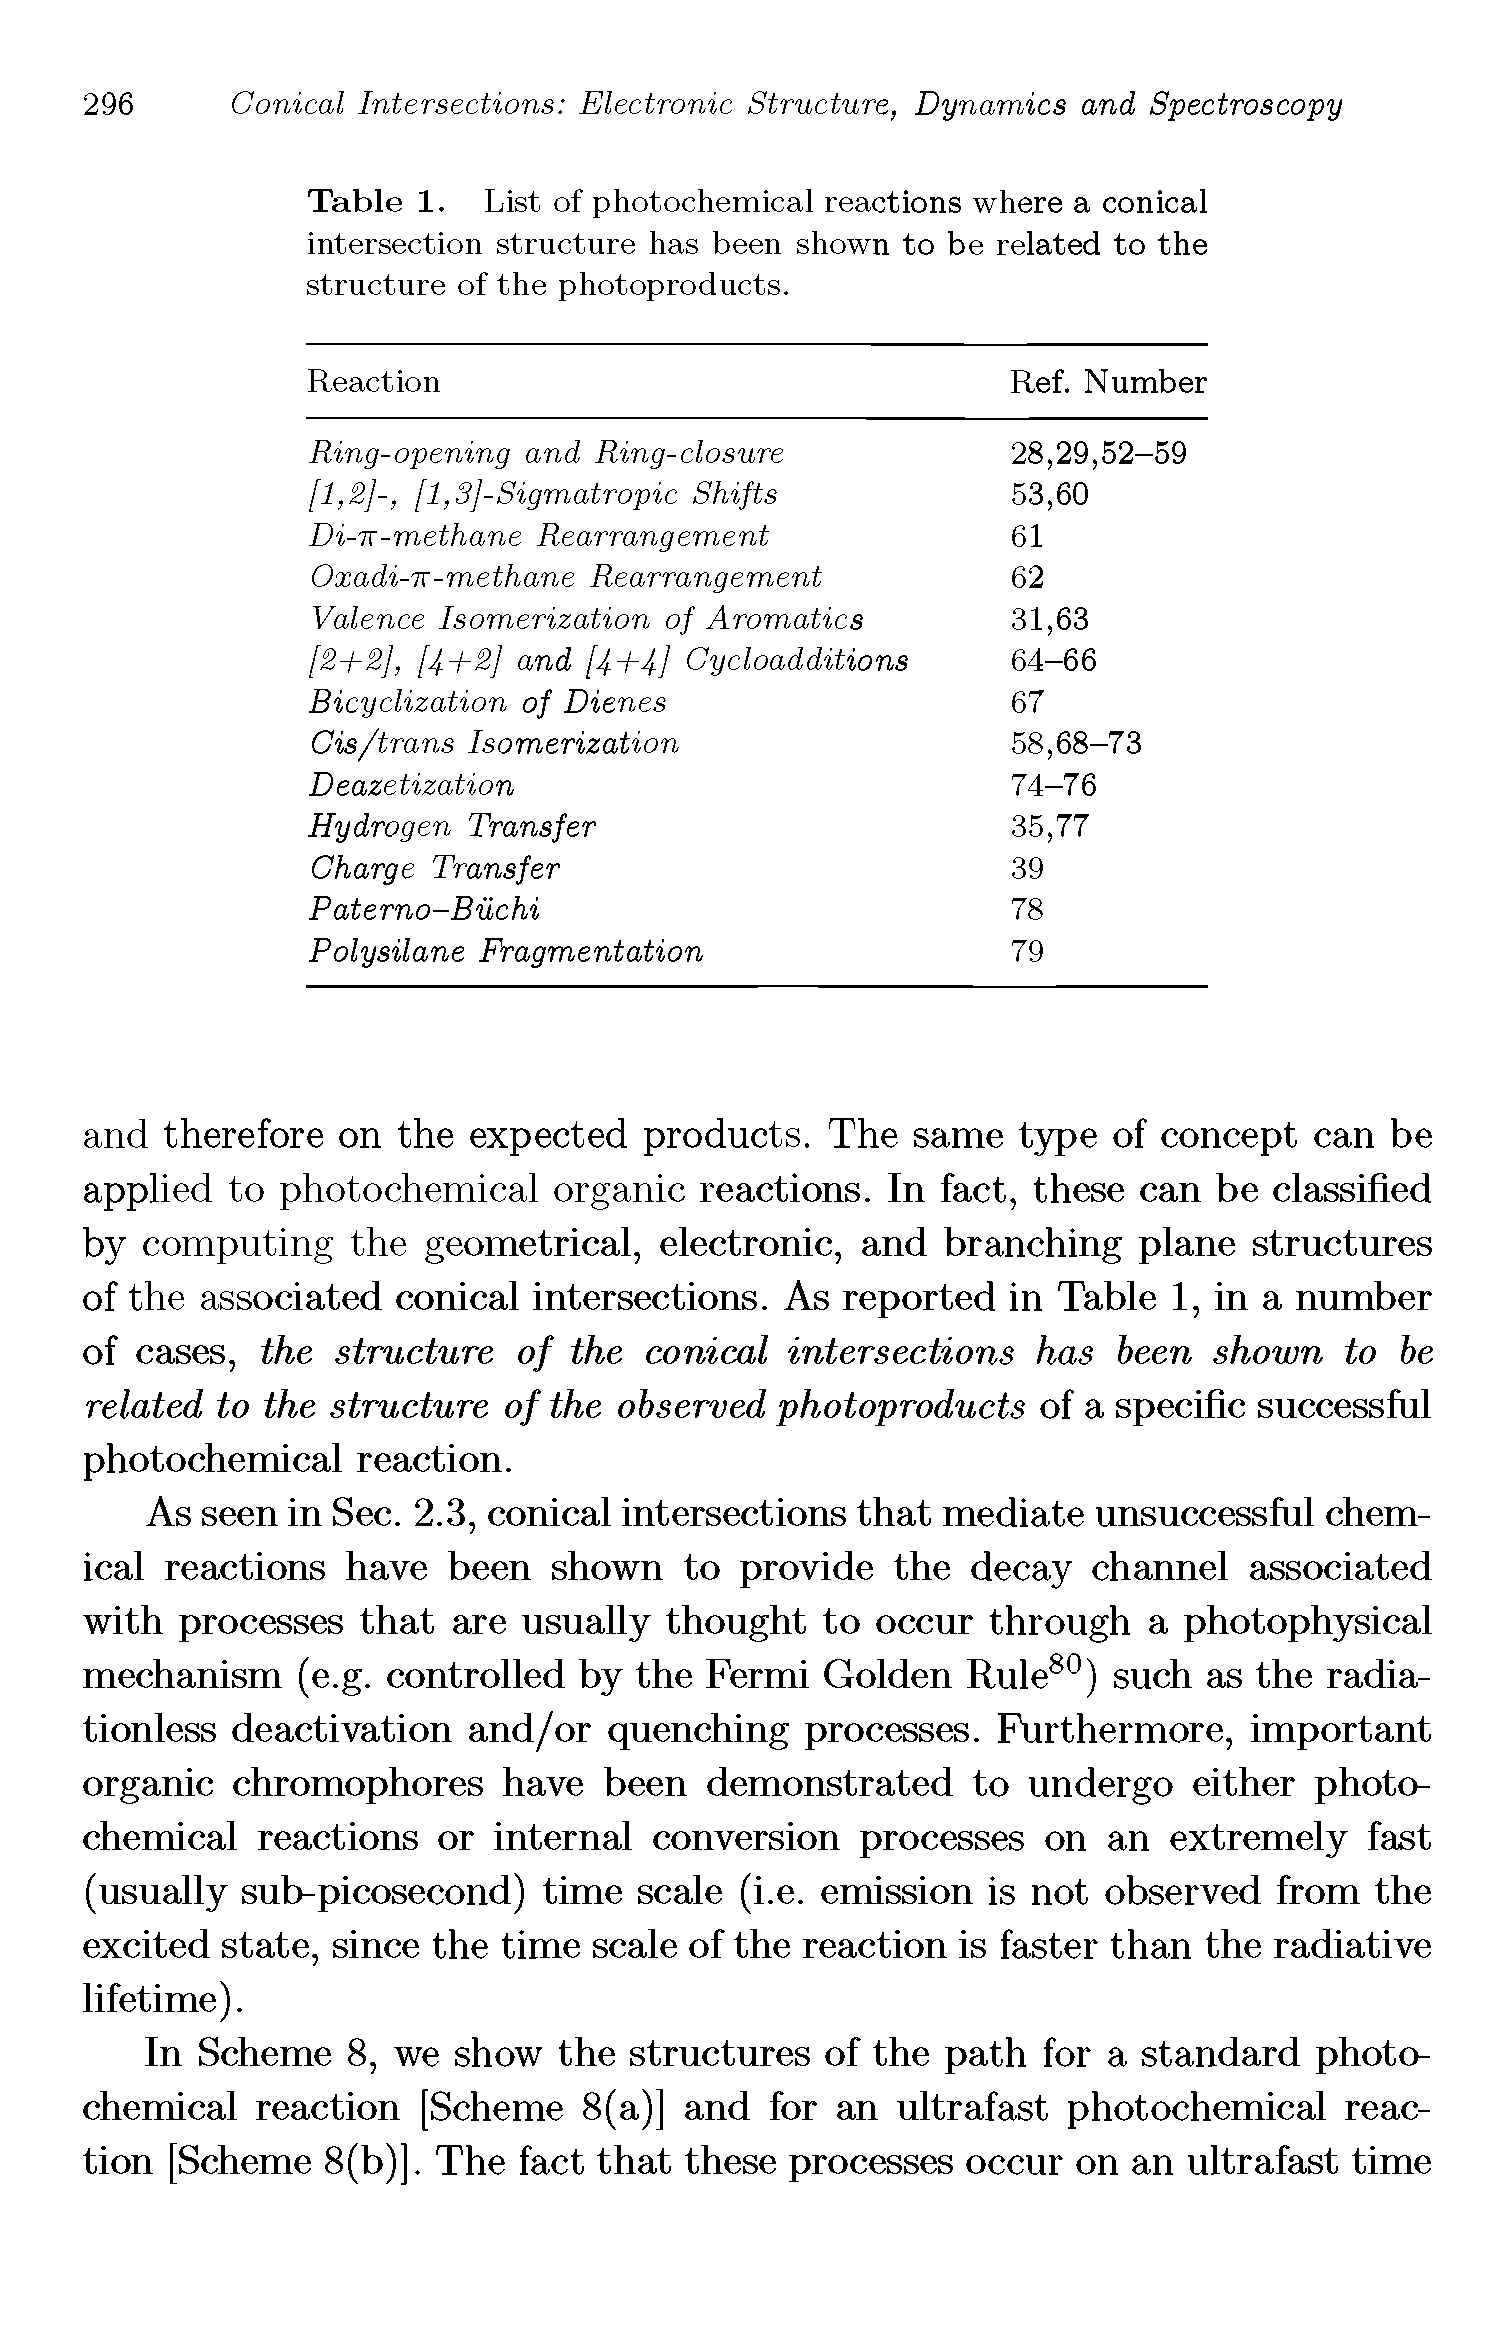 Table 1. List of photochemical reactions where a conical intersection structure has been shown to be related to the structure of the photoproducts.